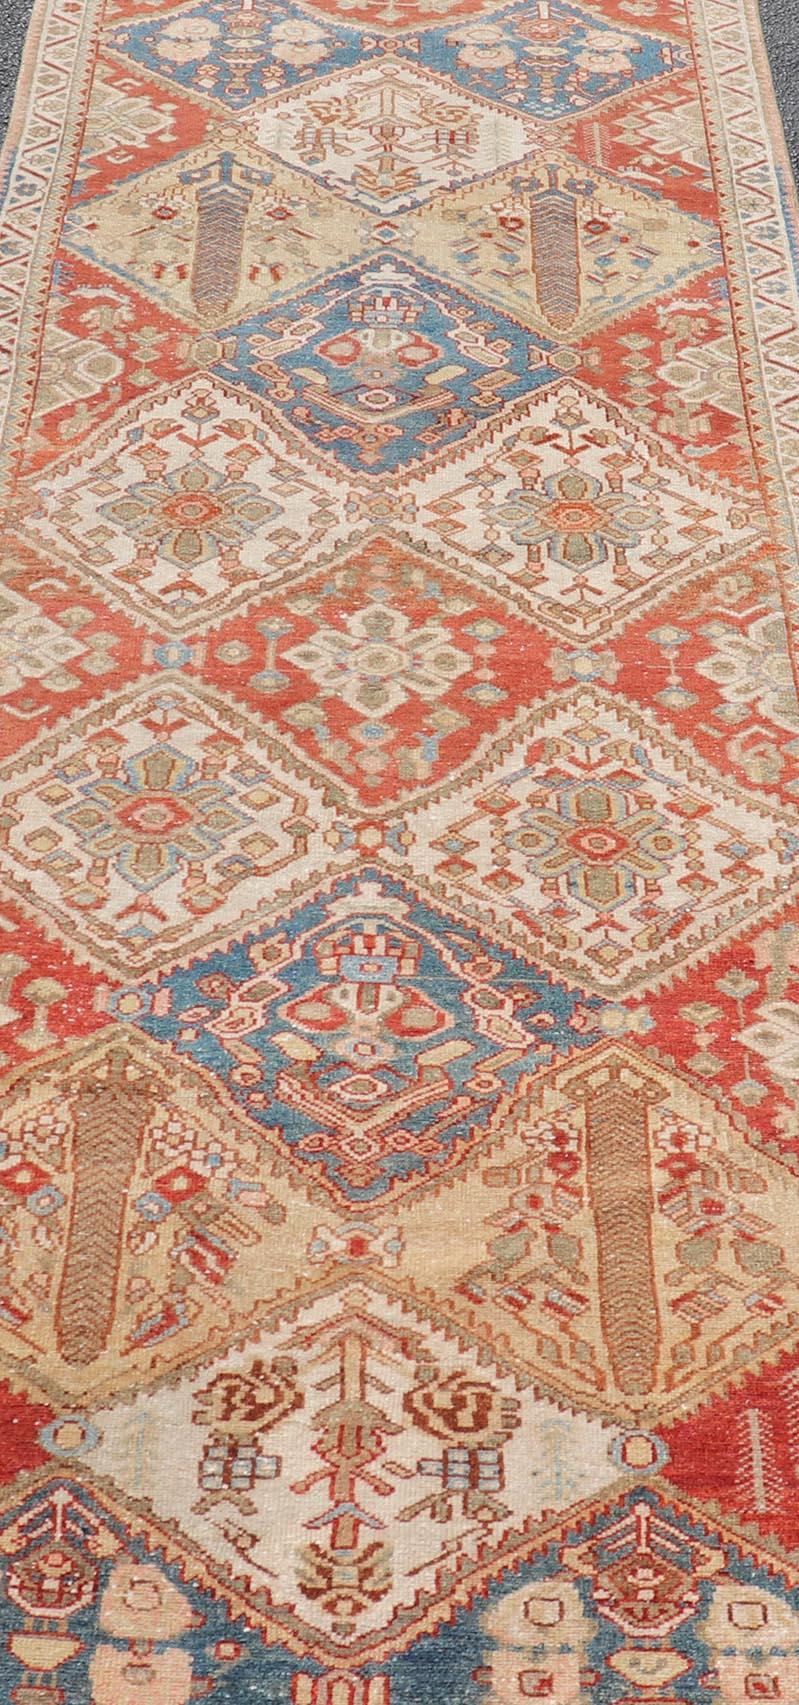 Antique Bakhtiari Persian Wide Runner in Garden Design by Keivan Woven Arts

Measures 3'7 x 11'7 

This remarkable Bakhtiari runner embodies the rich weaving tradition of its region. Characterized by intricate patterns in warm shades. Traditional